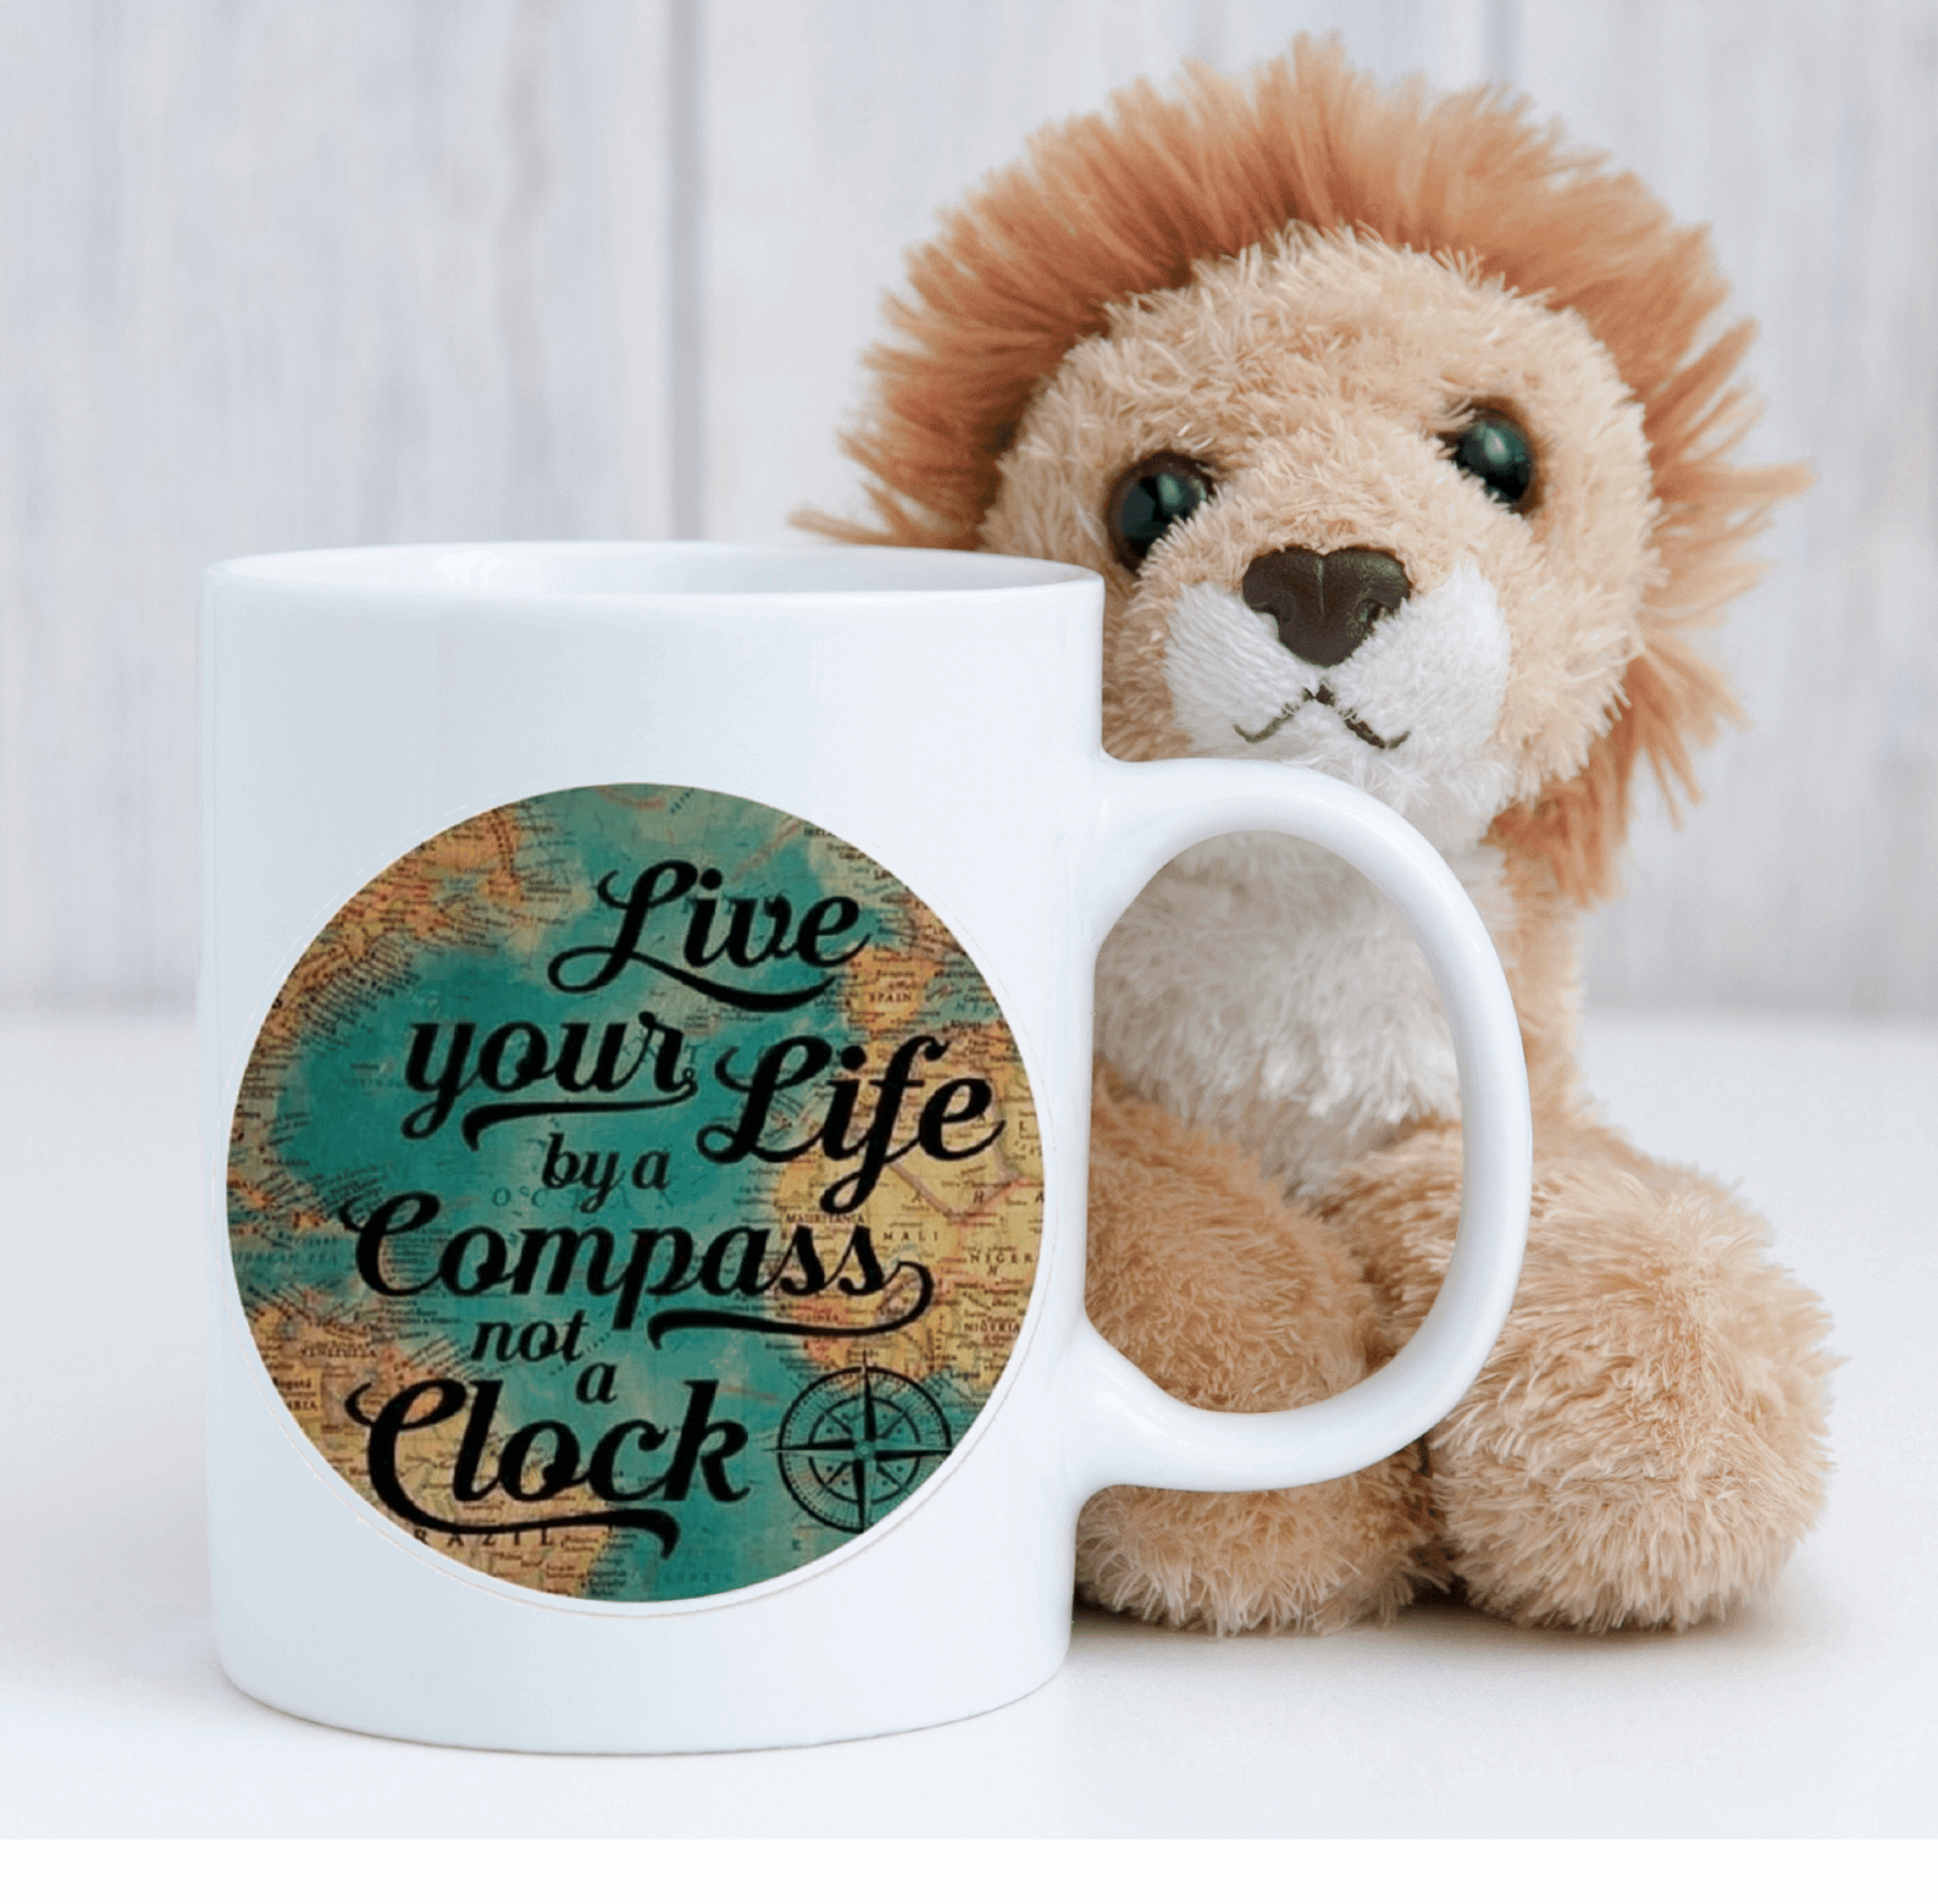  Live Your Life By The Compass Not The Clock Mug by Free Spirit Accessories sold by Free Spirit Accessories